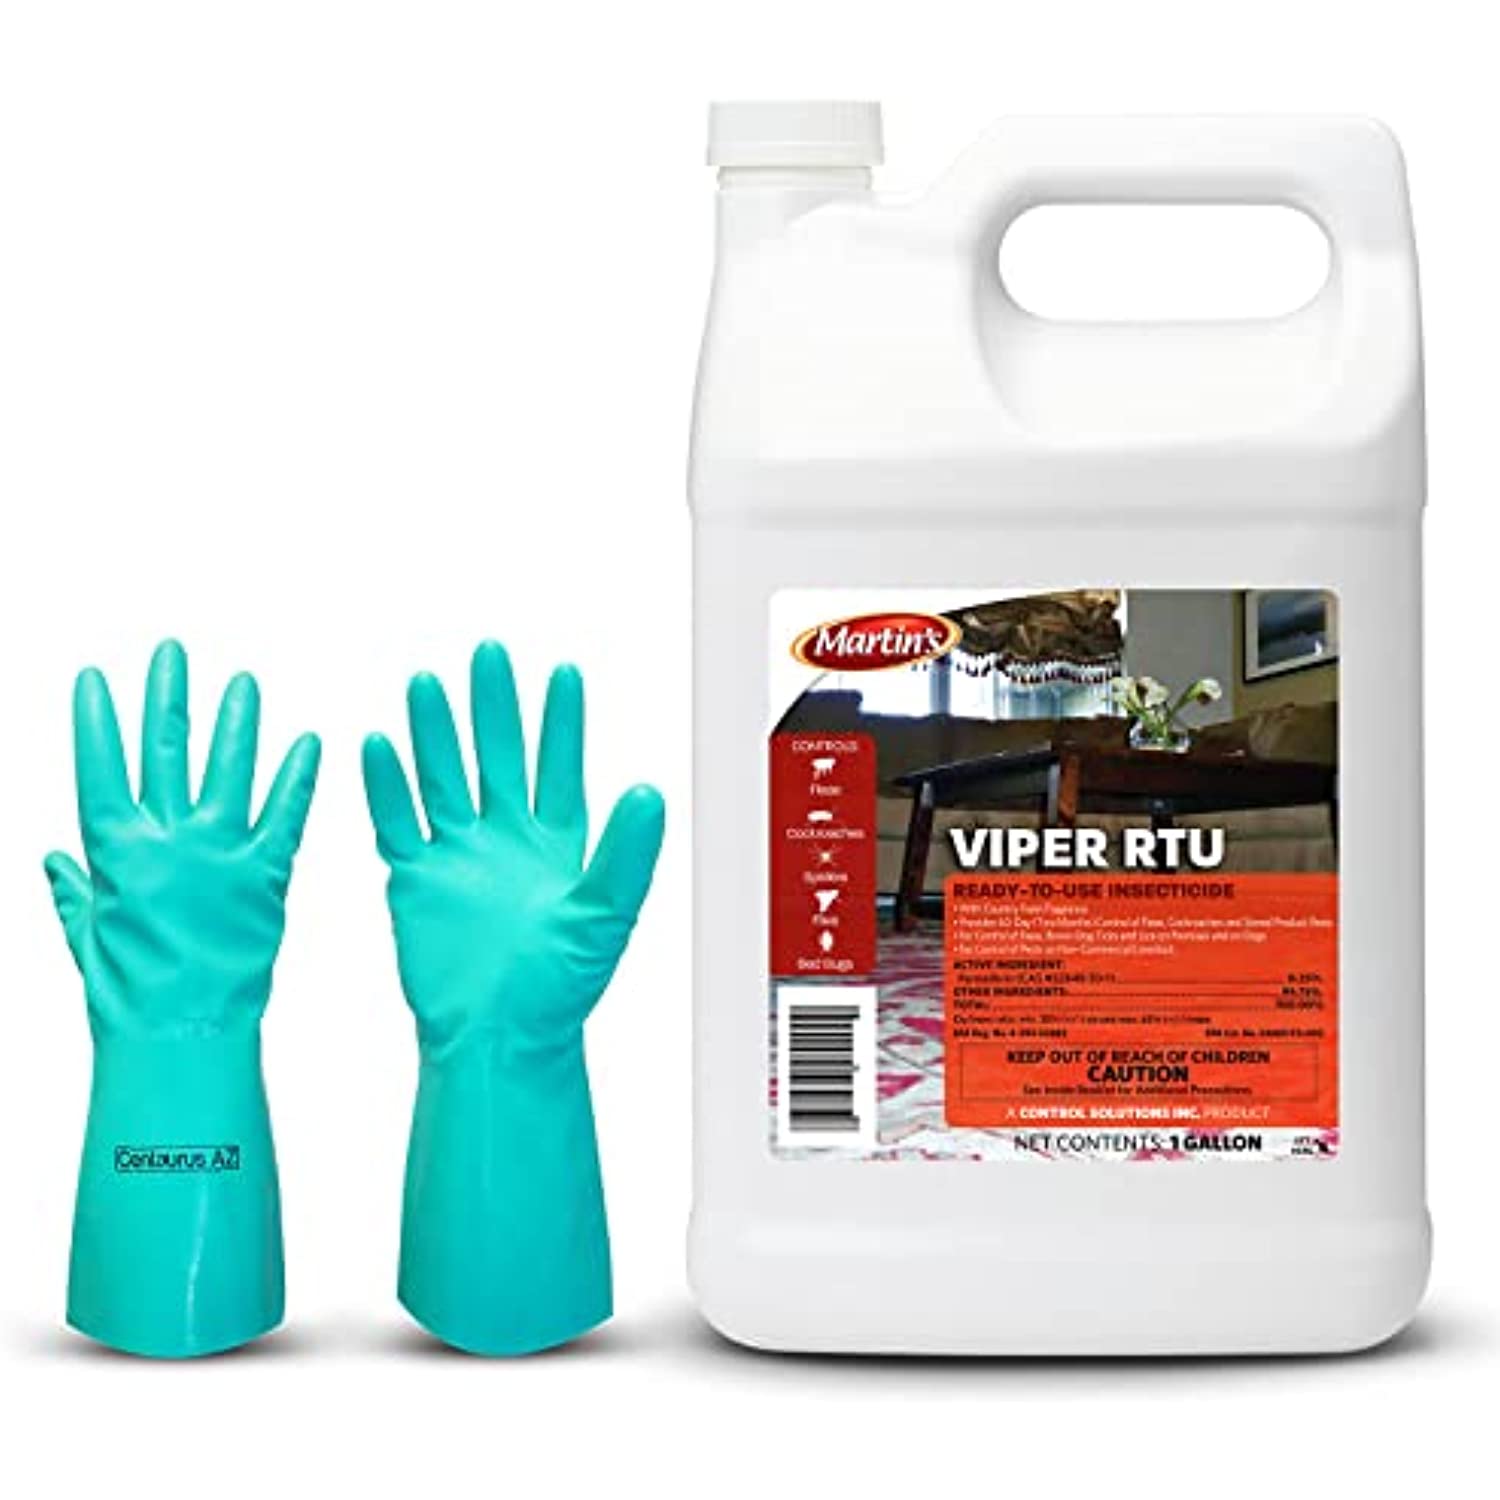 Martins Viper RTU Insecticide insecticide indoor outdoor Powerful bug repellent pest control home defense Insecticide insect control solutions Available with Premium Quality Centaurus AZ Gloves 1 Gal